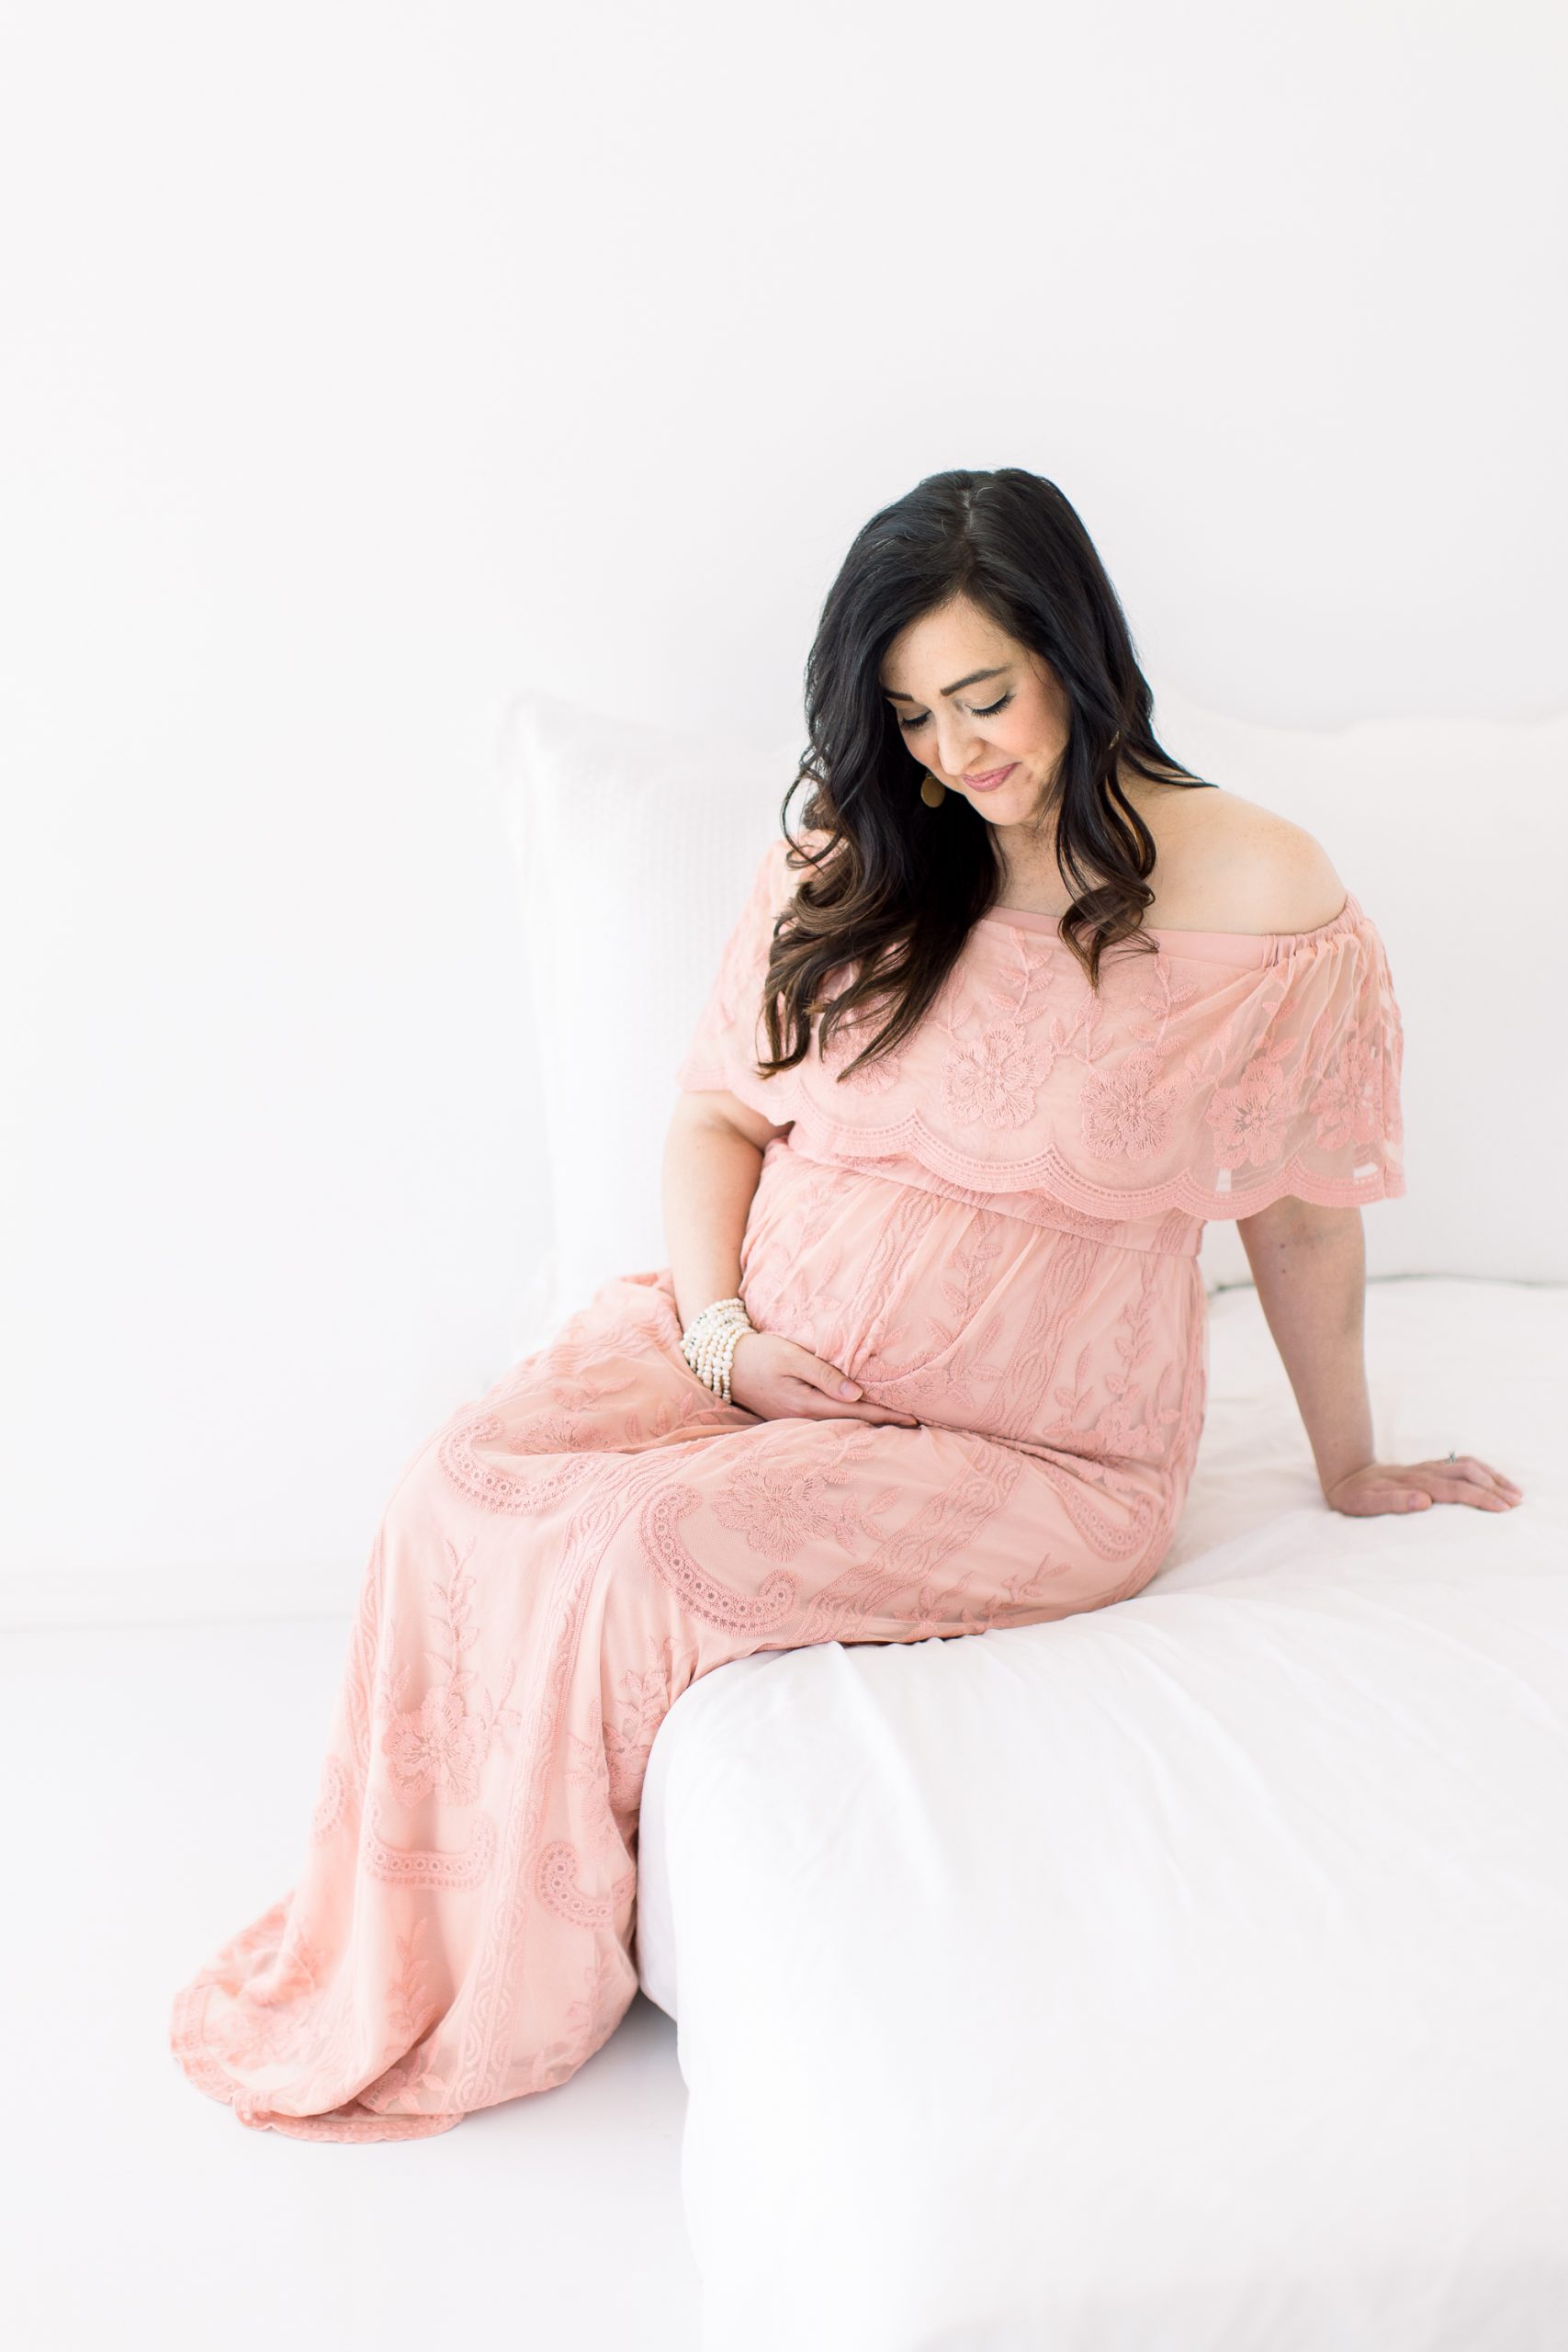 Stunning expecting mama in a pink maternity dress in OKC.